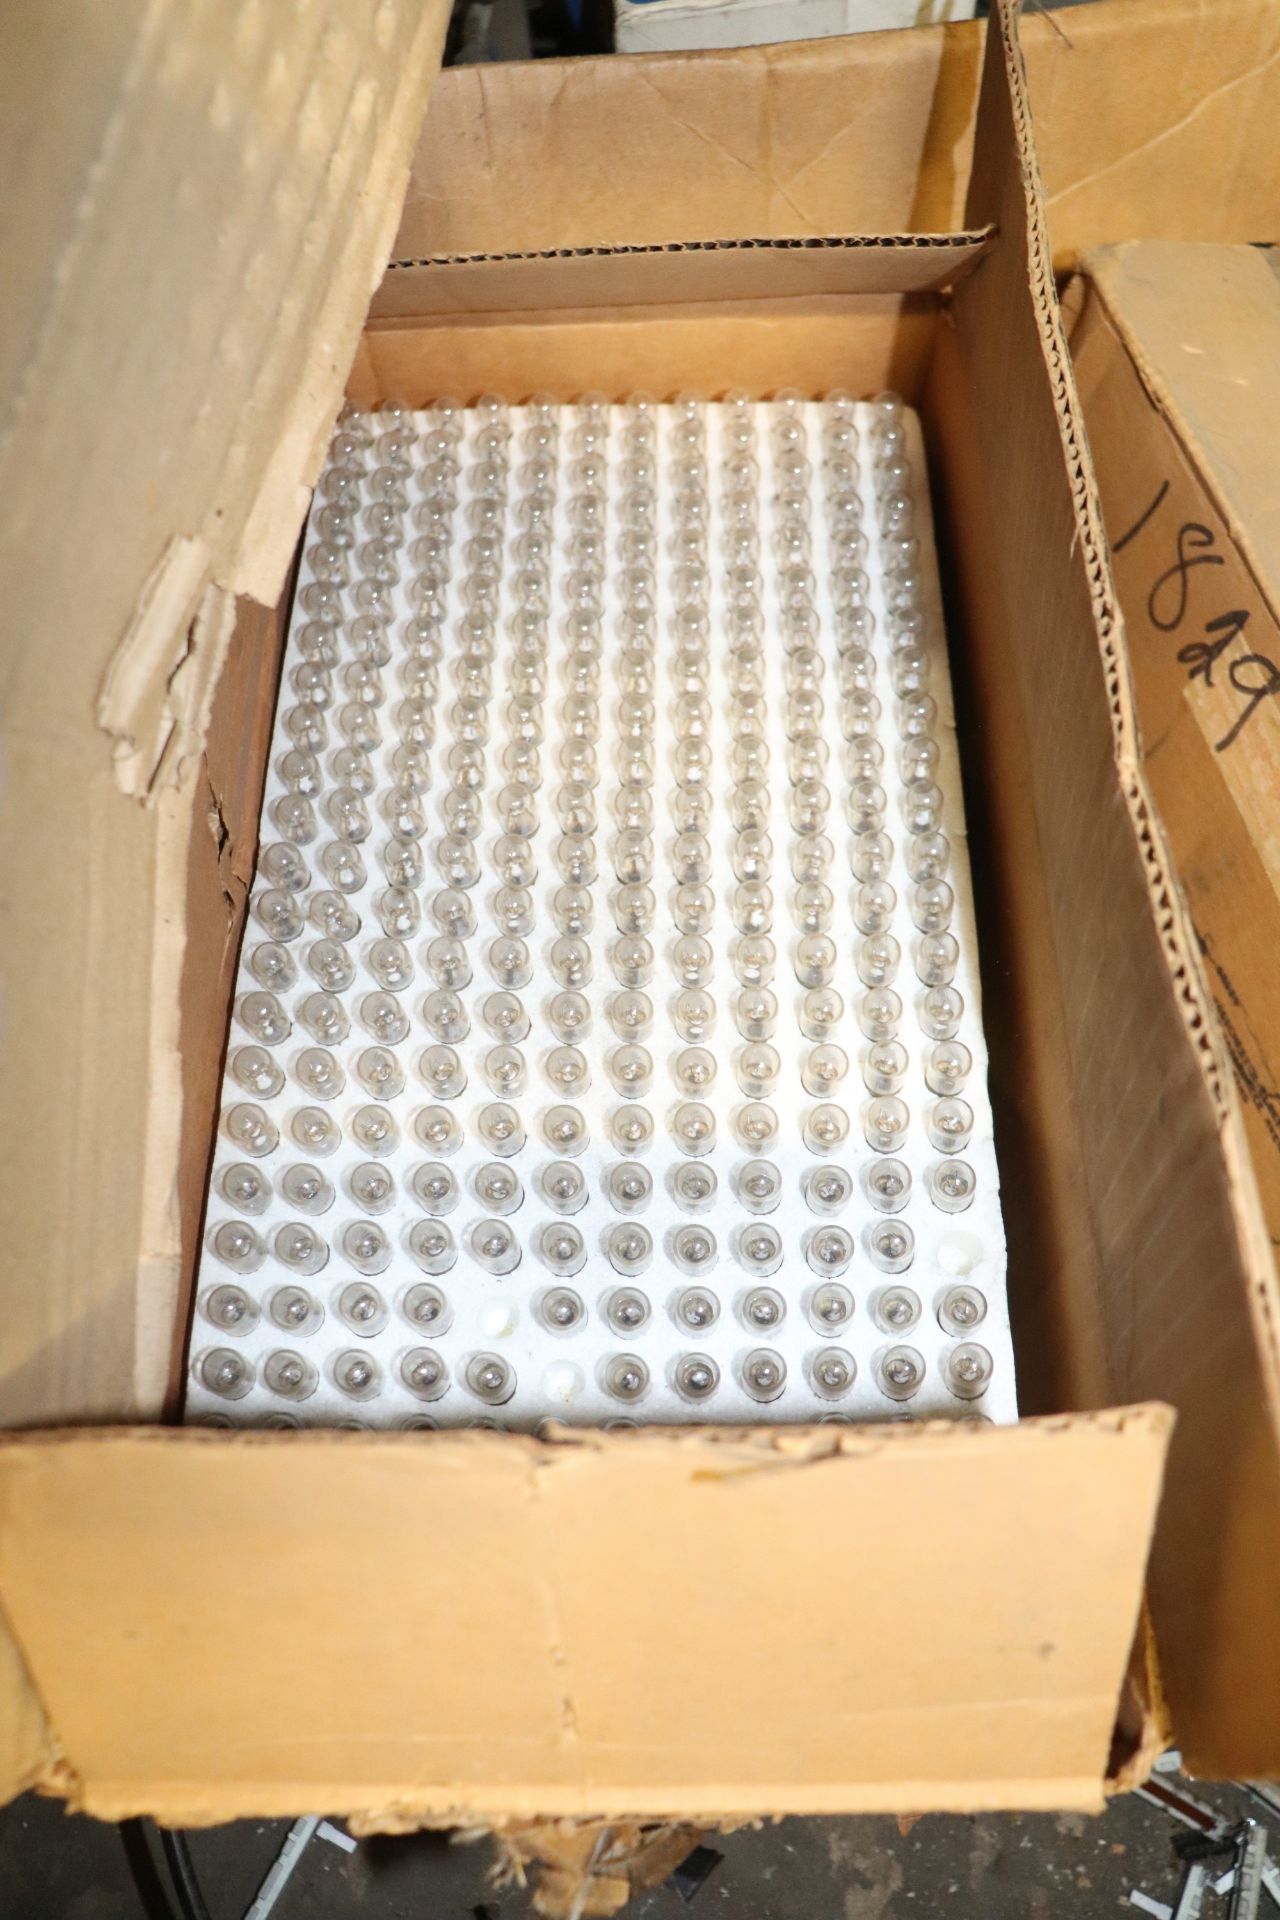 Pallet of small light bulbs, electrical components, circuit breakers, power bricks, and electric mot - Image 4 of 11